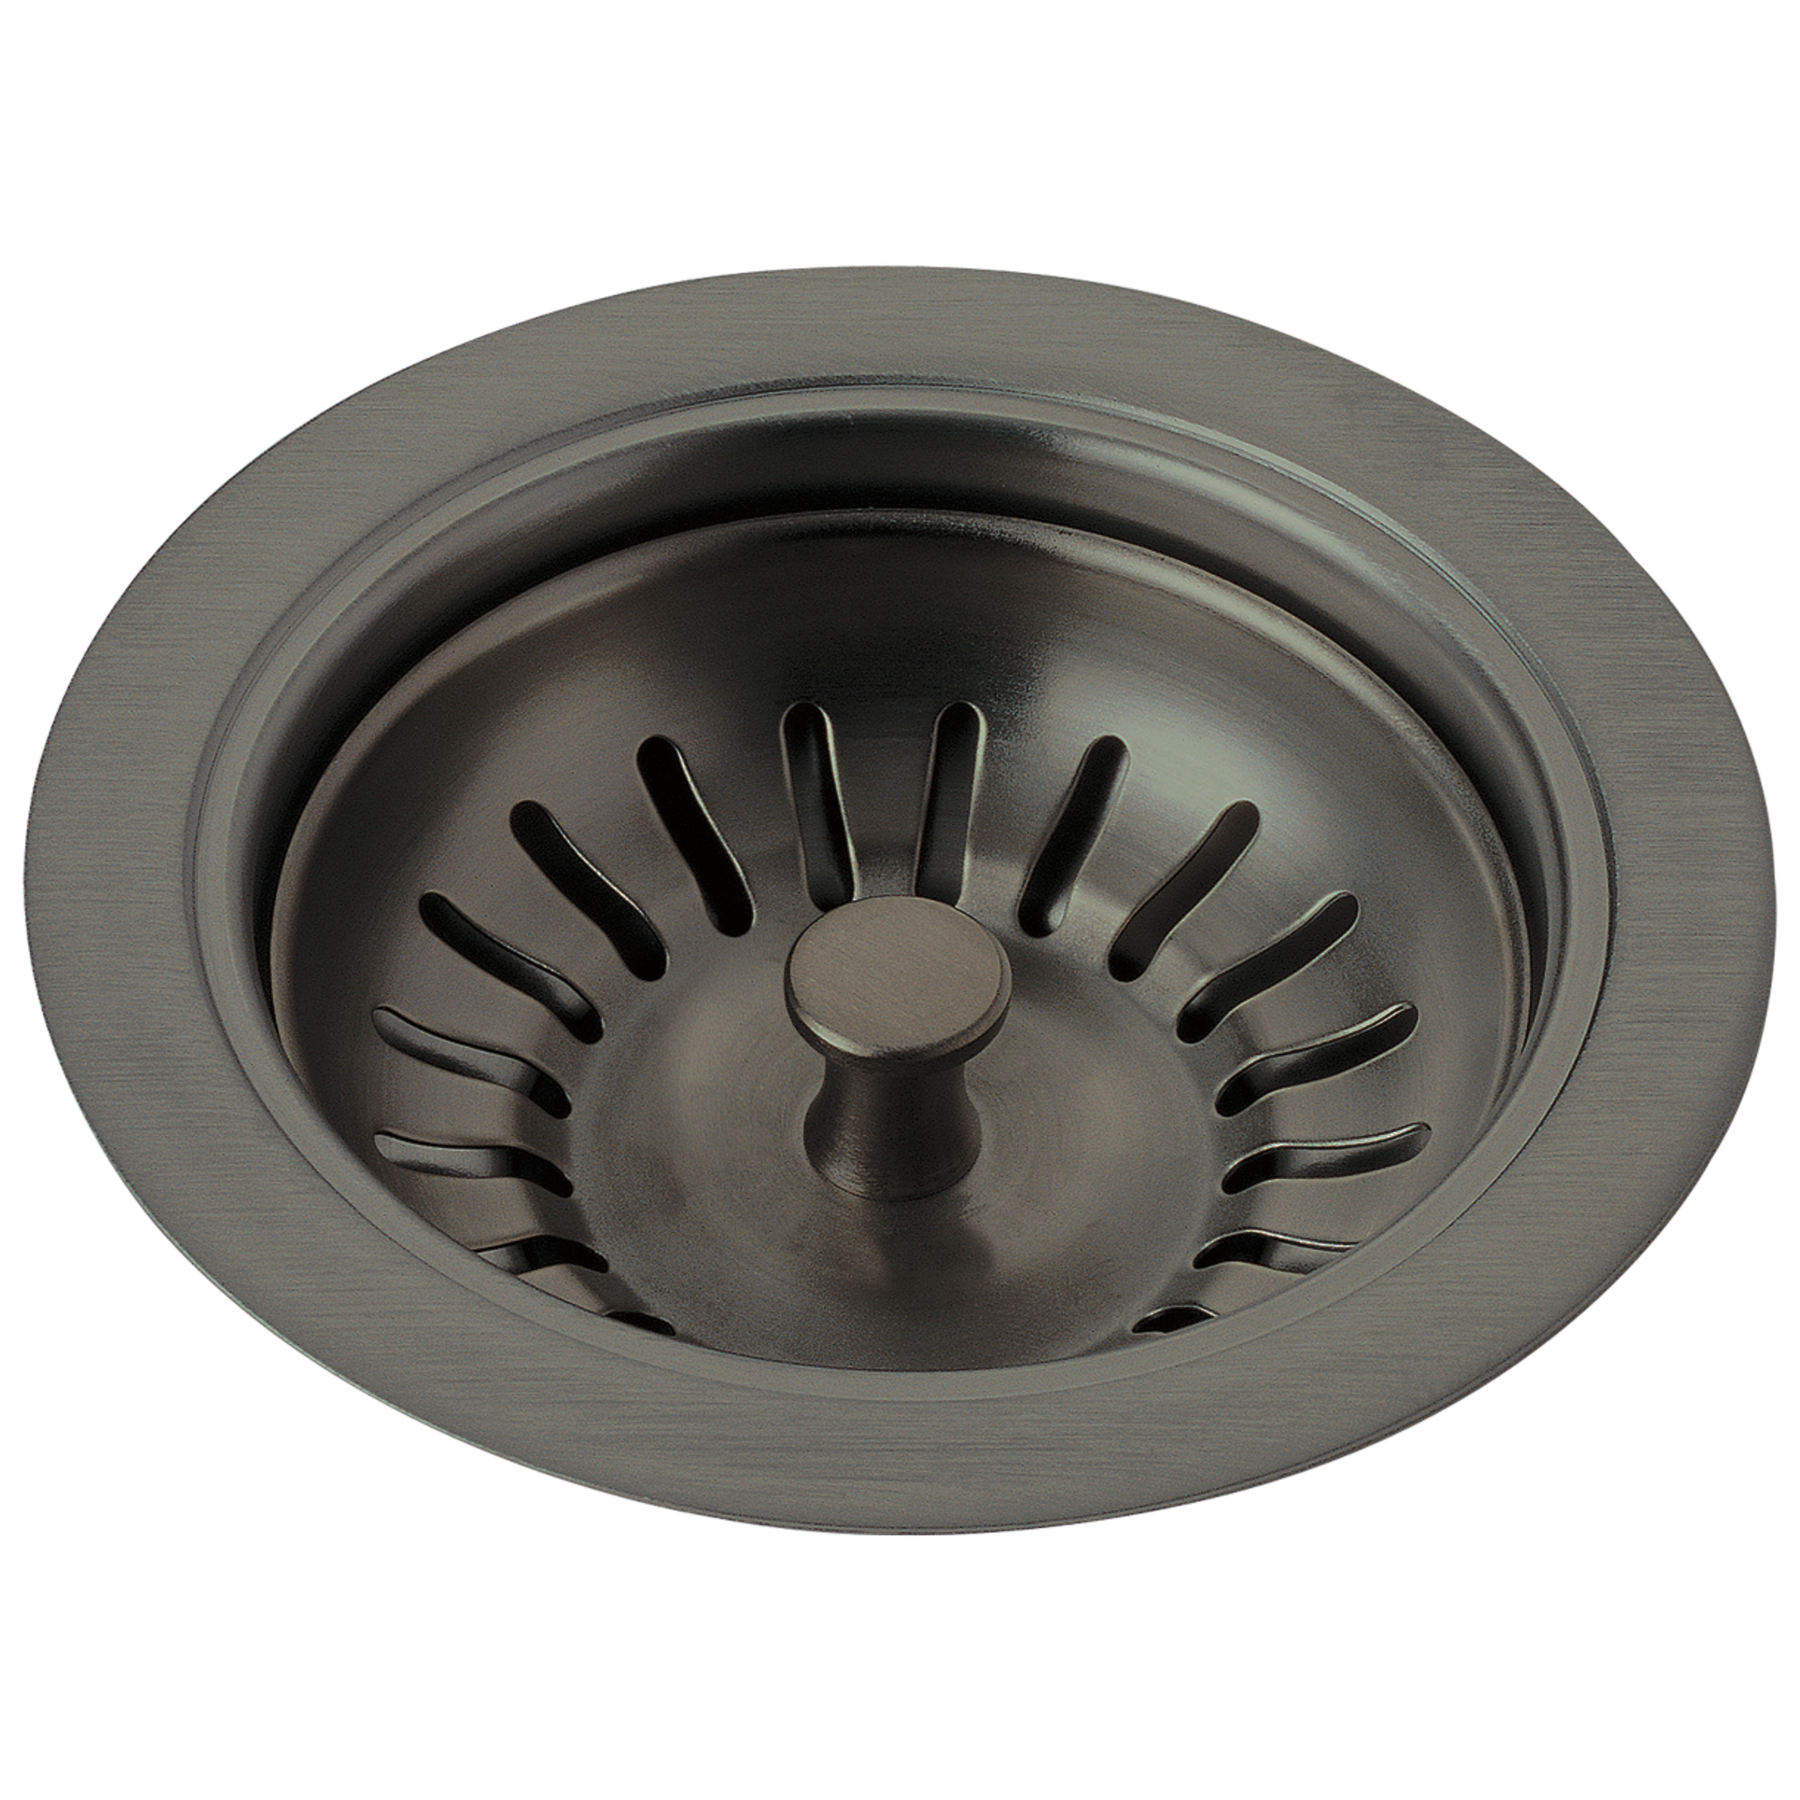 Kitchen Sink Flange and Strainer in Black Stainless 72010-KS